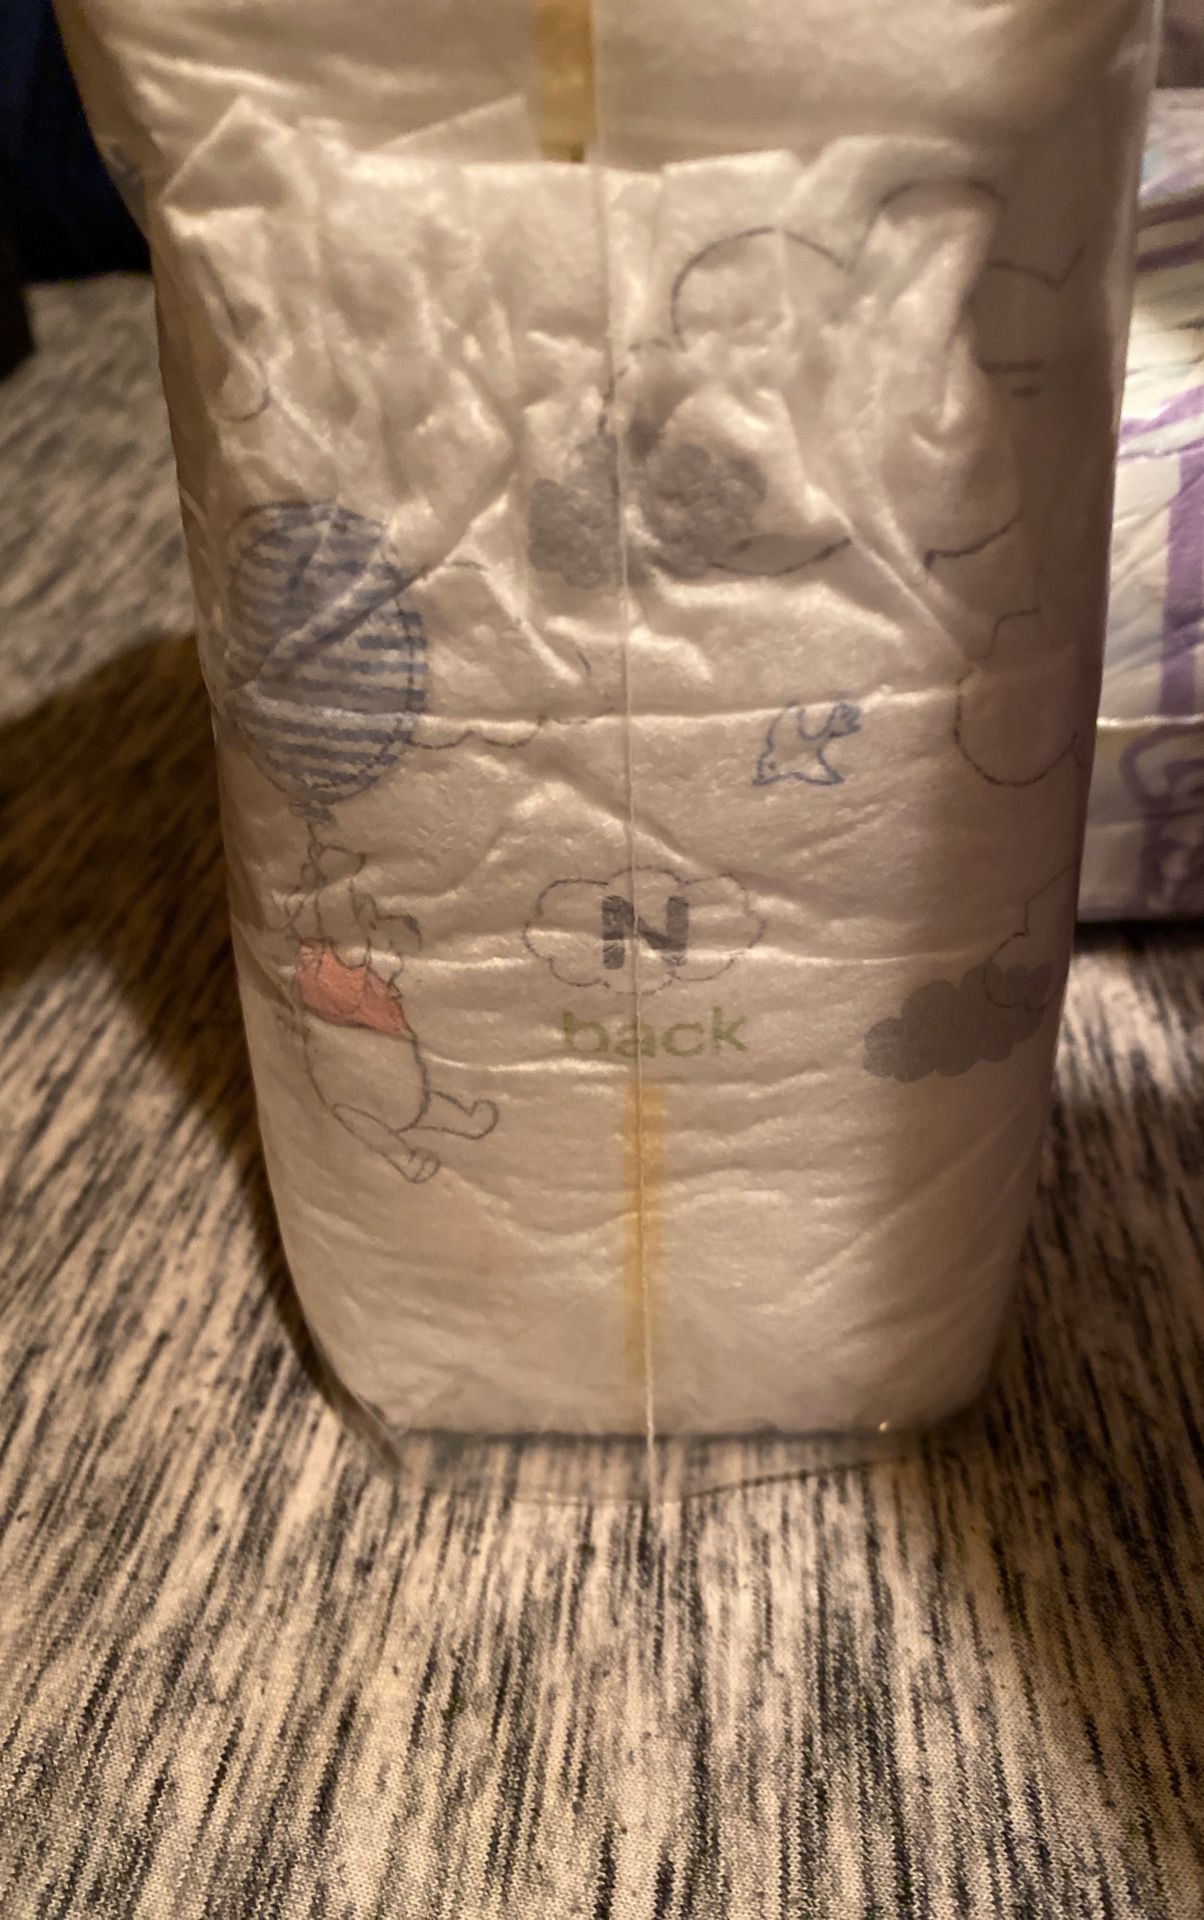 Newborn Diapers For Trade Or $20 For 100ct.